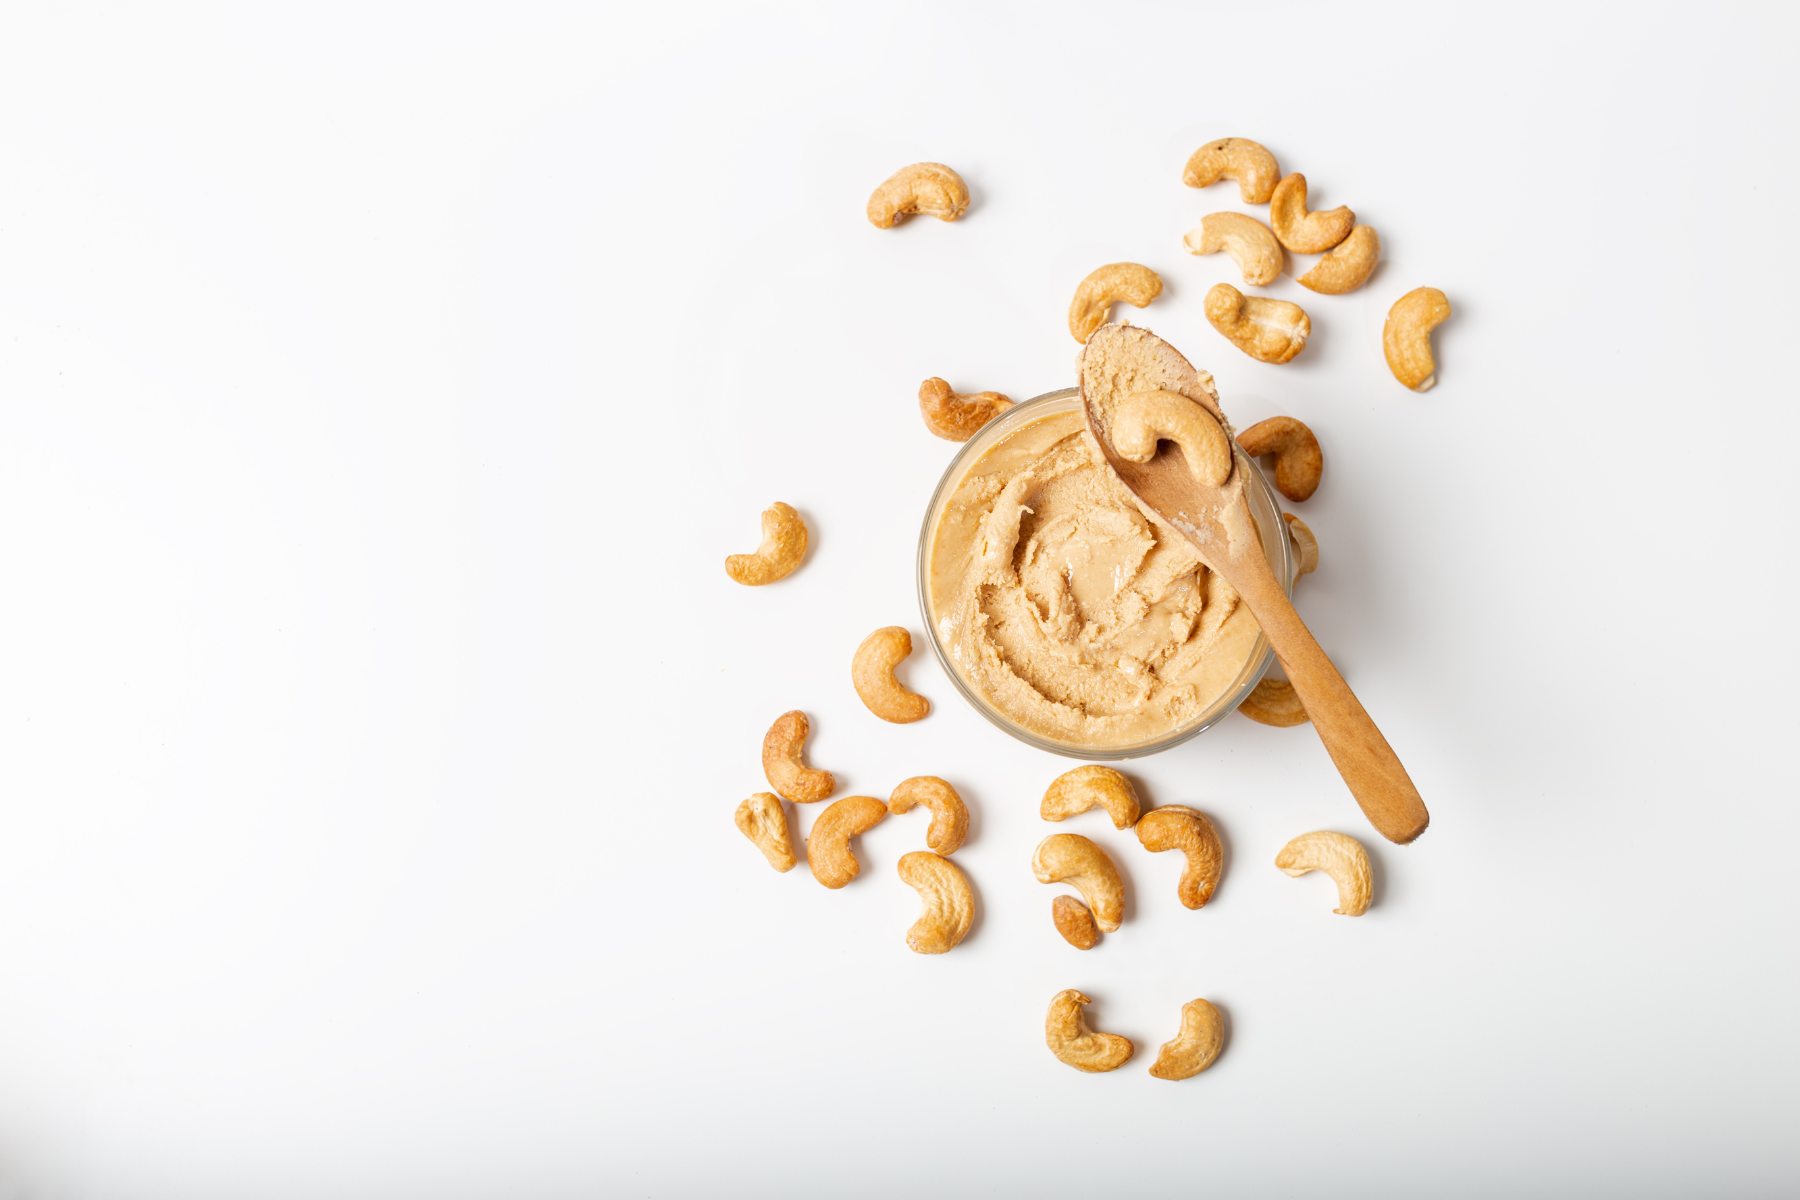 cashew butter in a bowl against a white background with some loose cashews scattered around it.